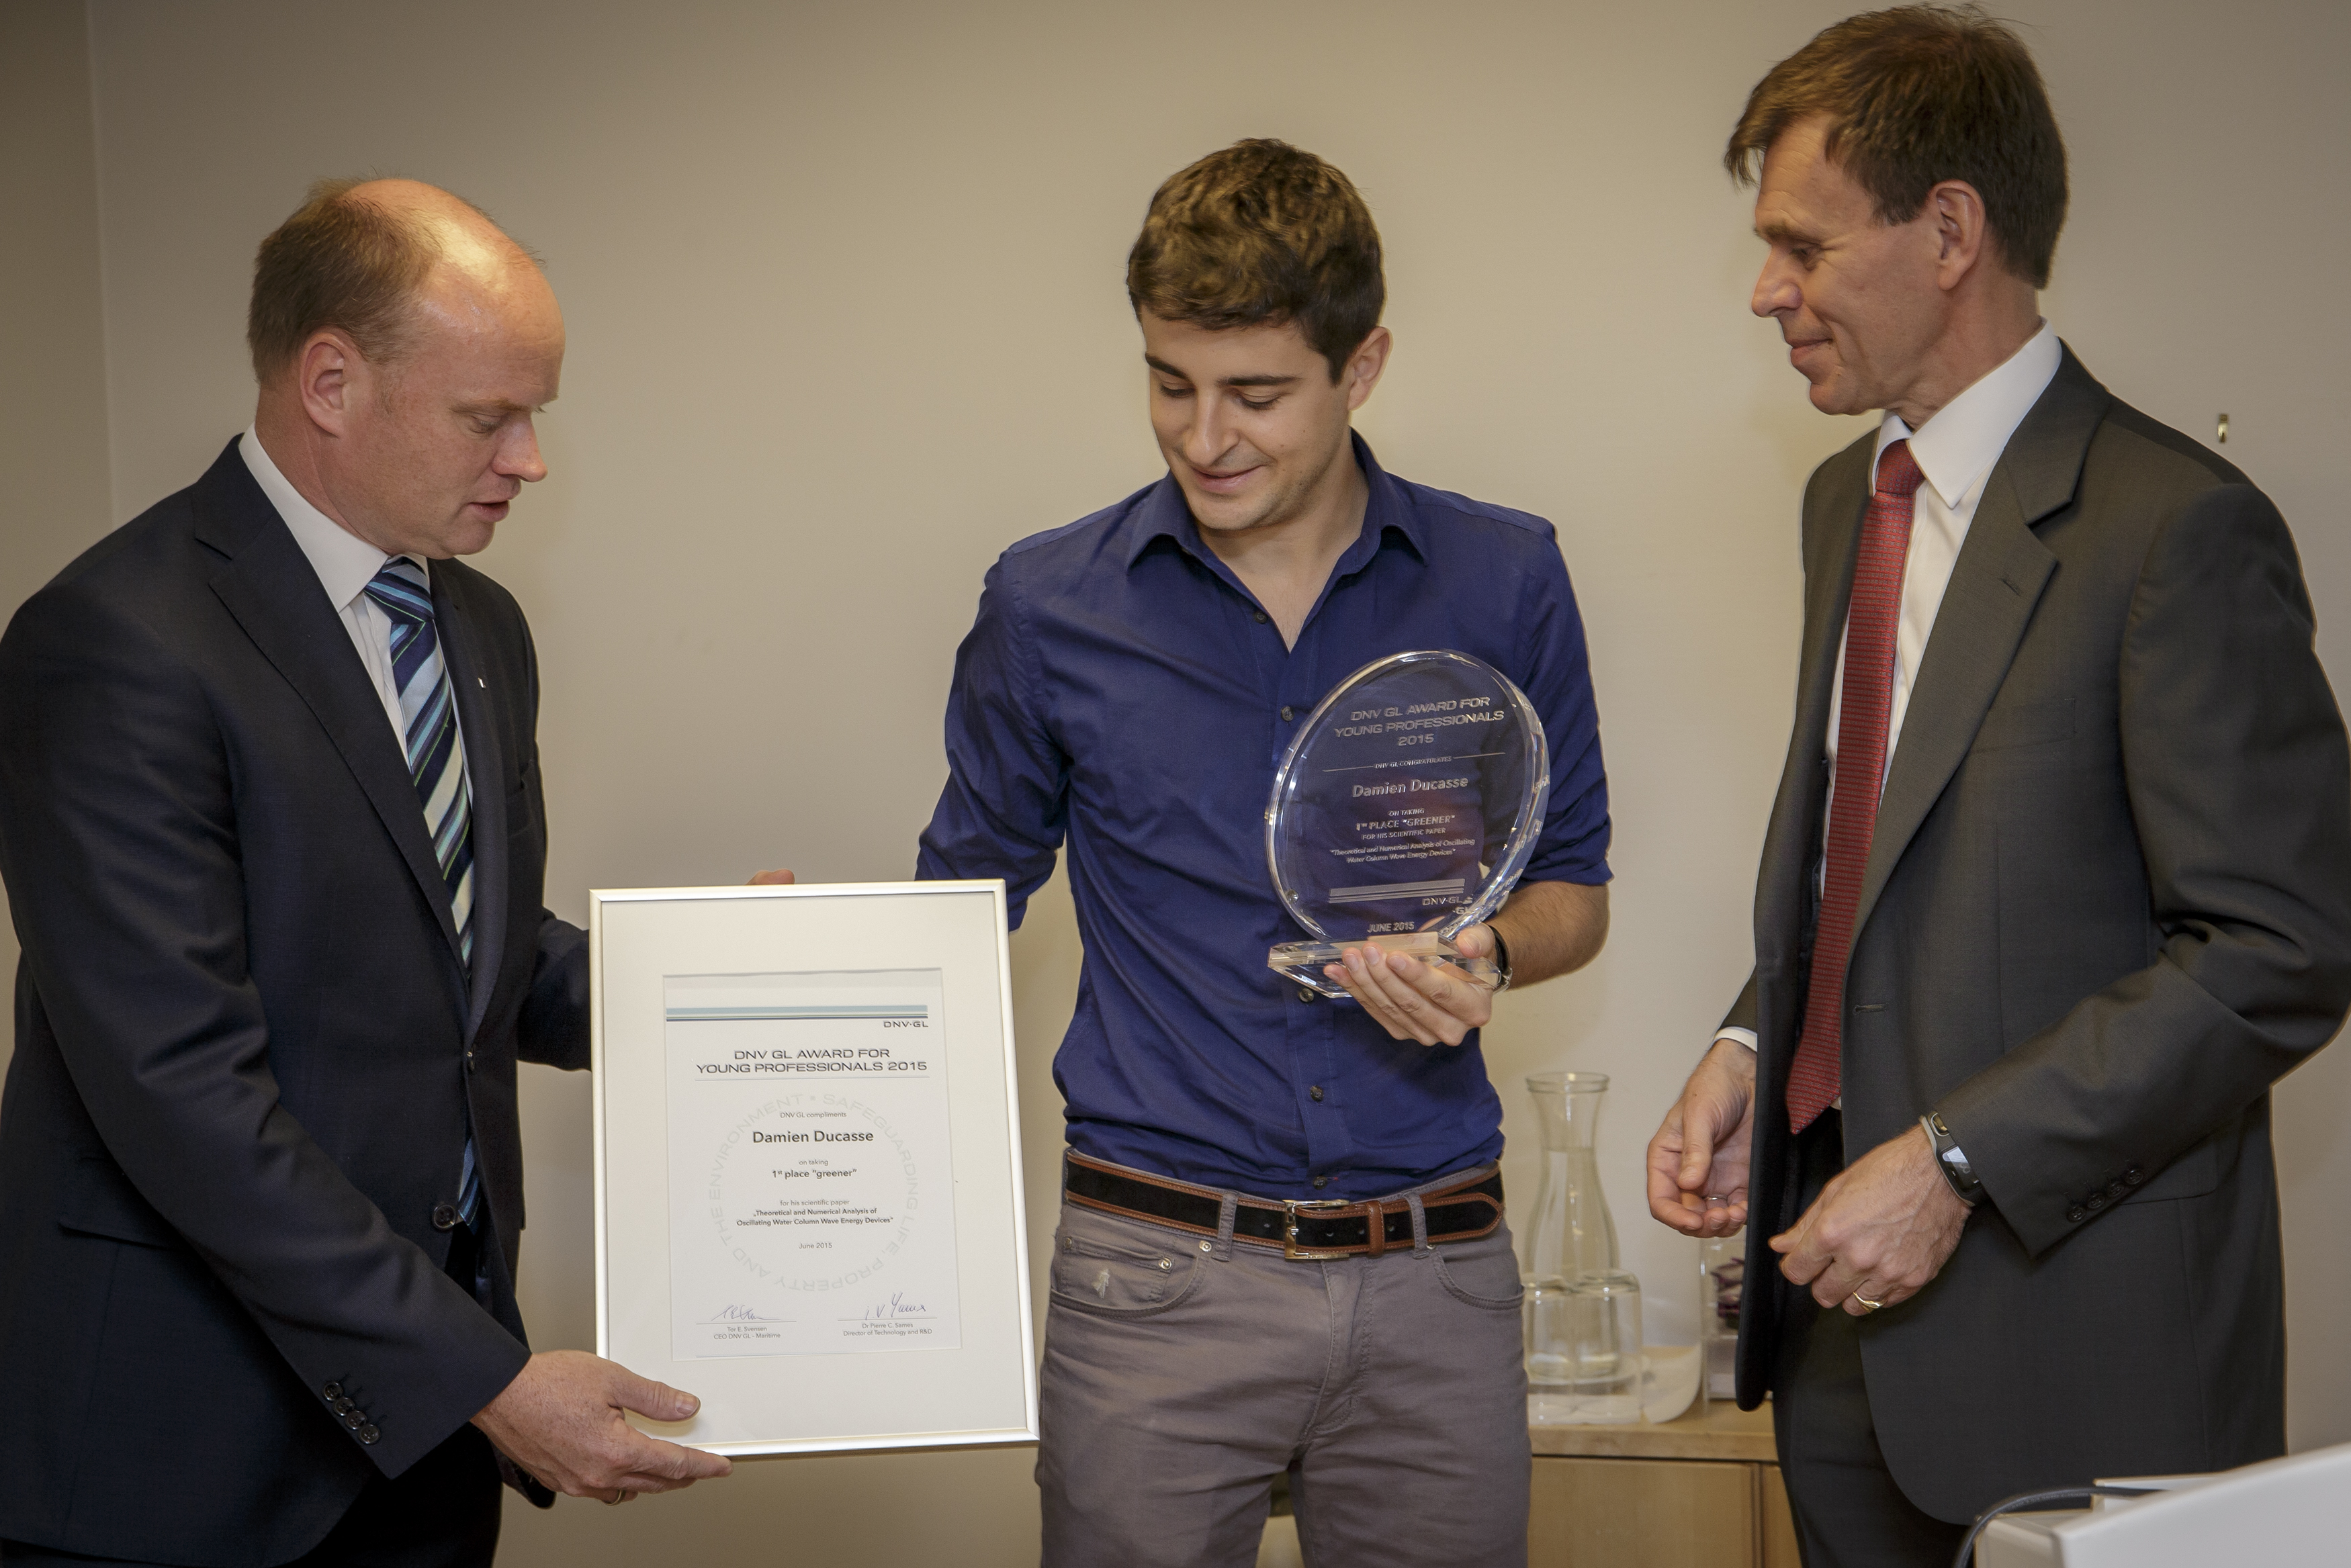 DNV GL Award for Young Professionals